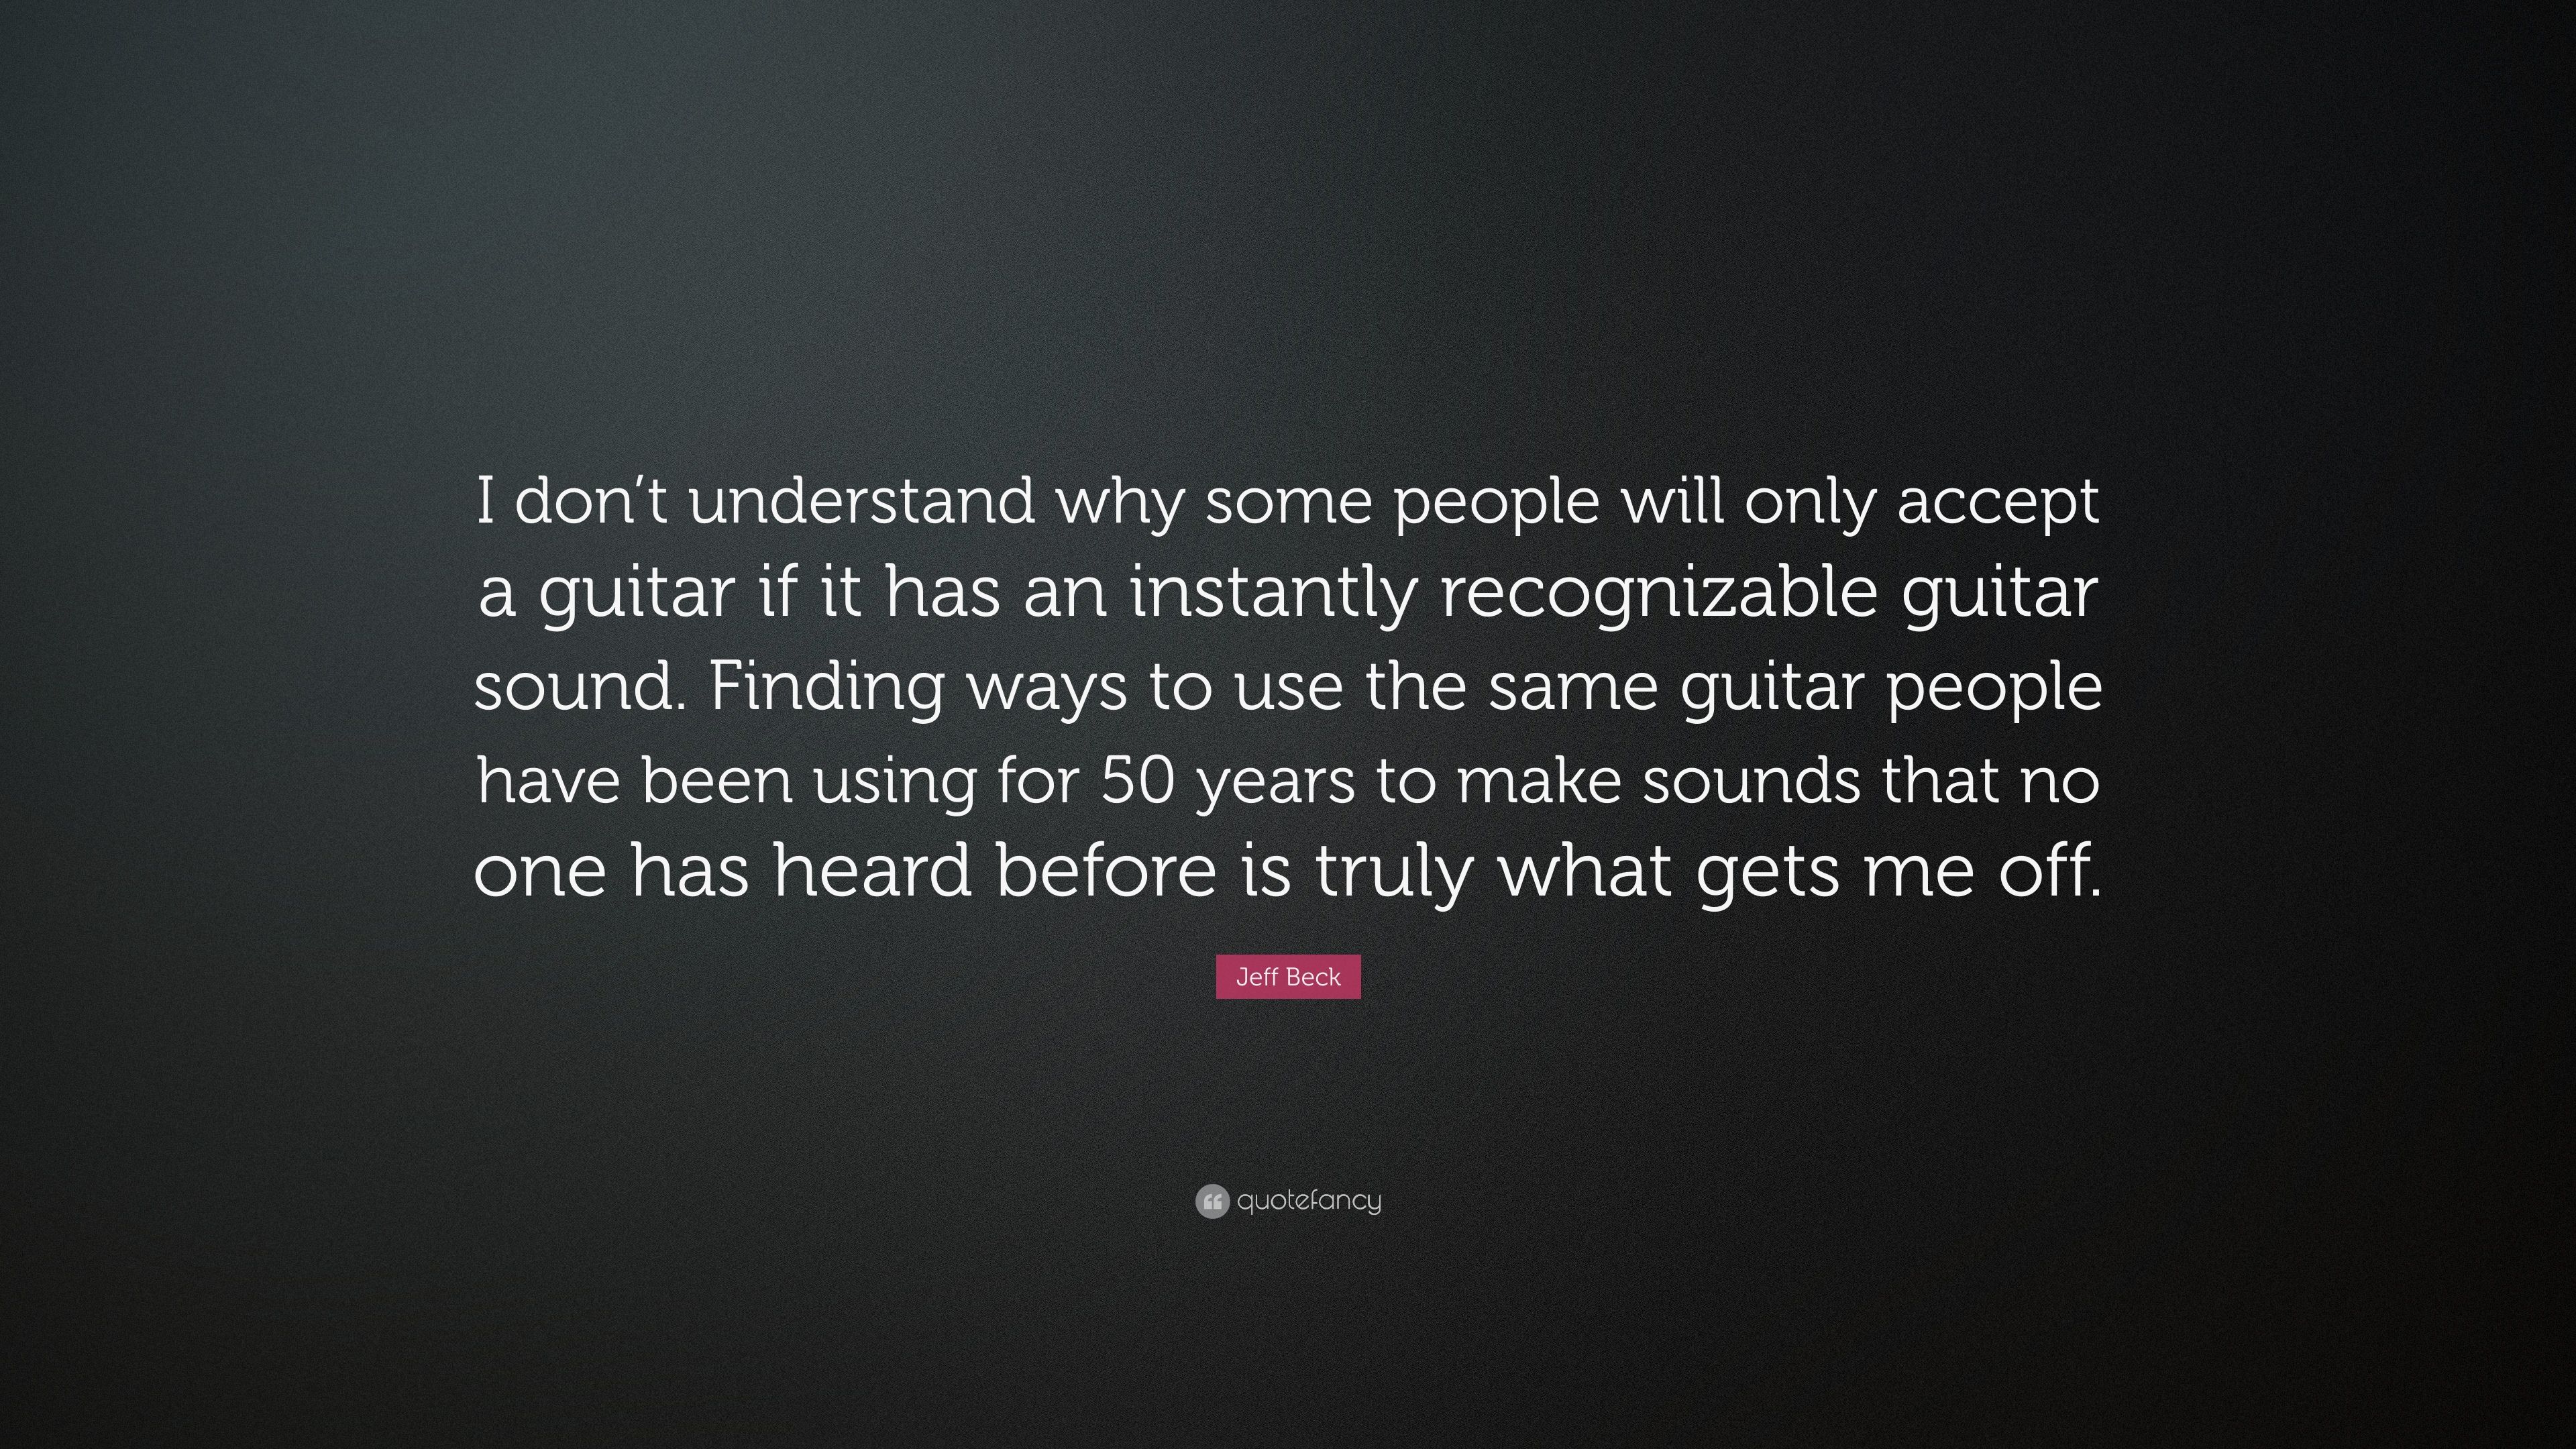 Jeff Beck Quote: “I don't understand why some people will only